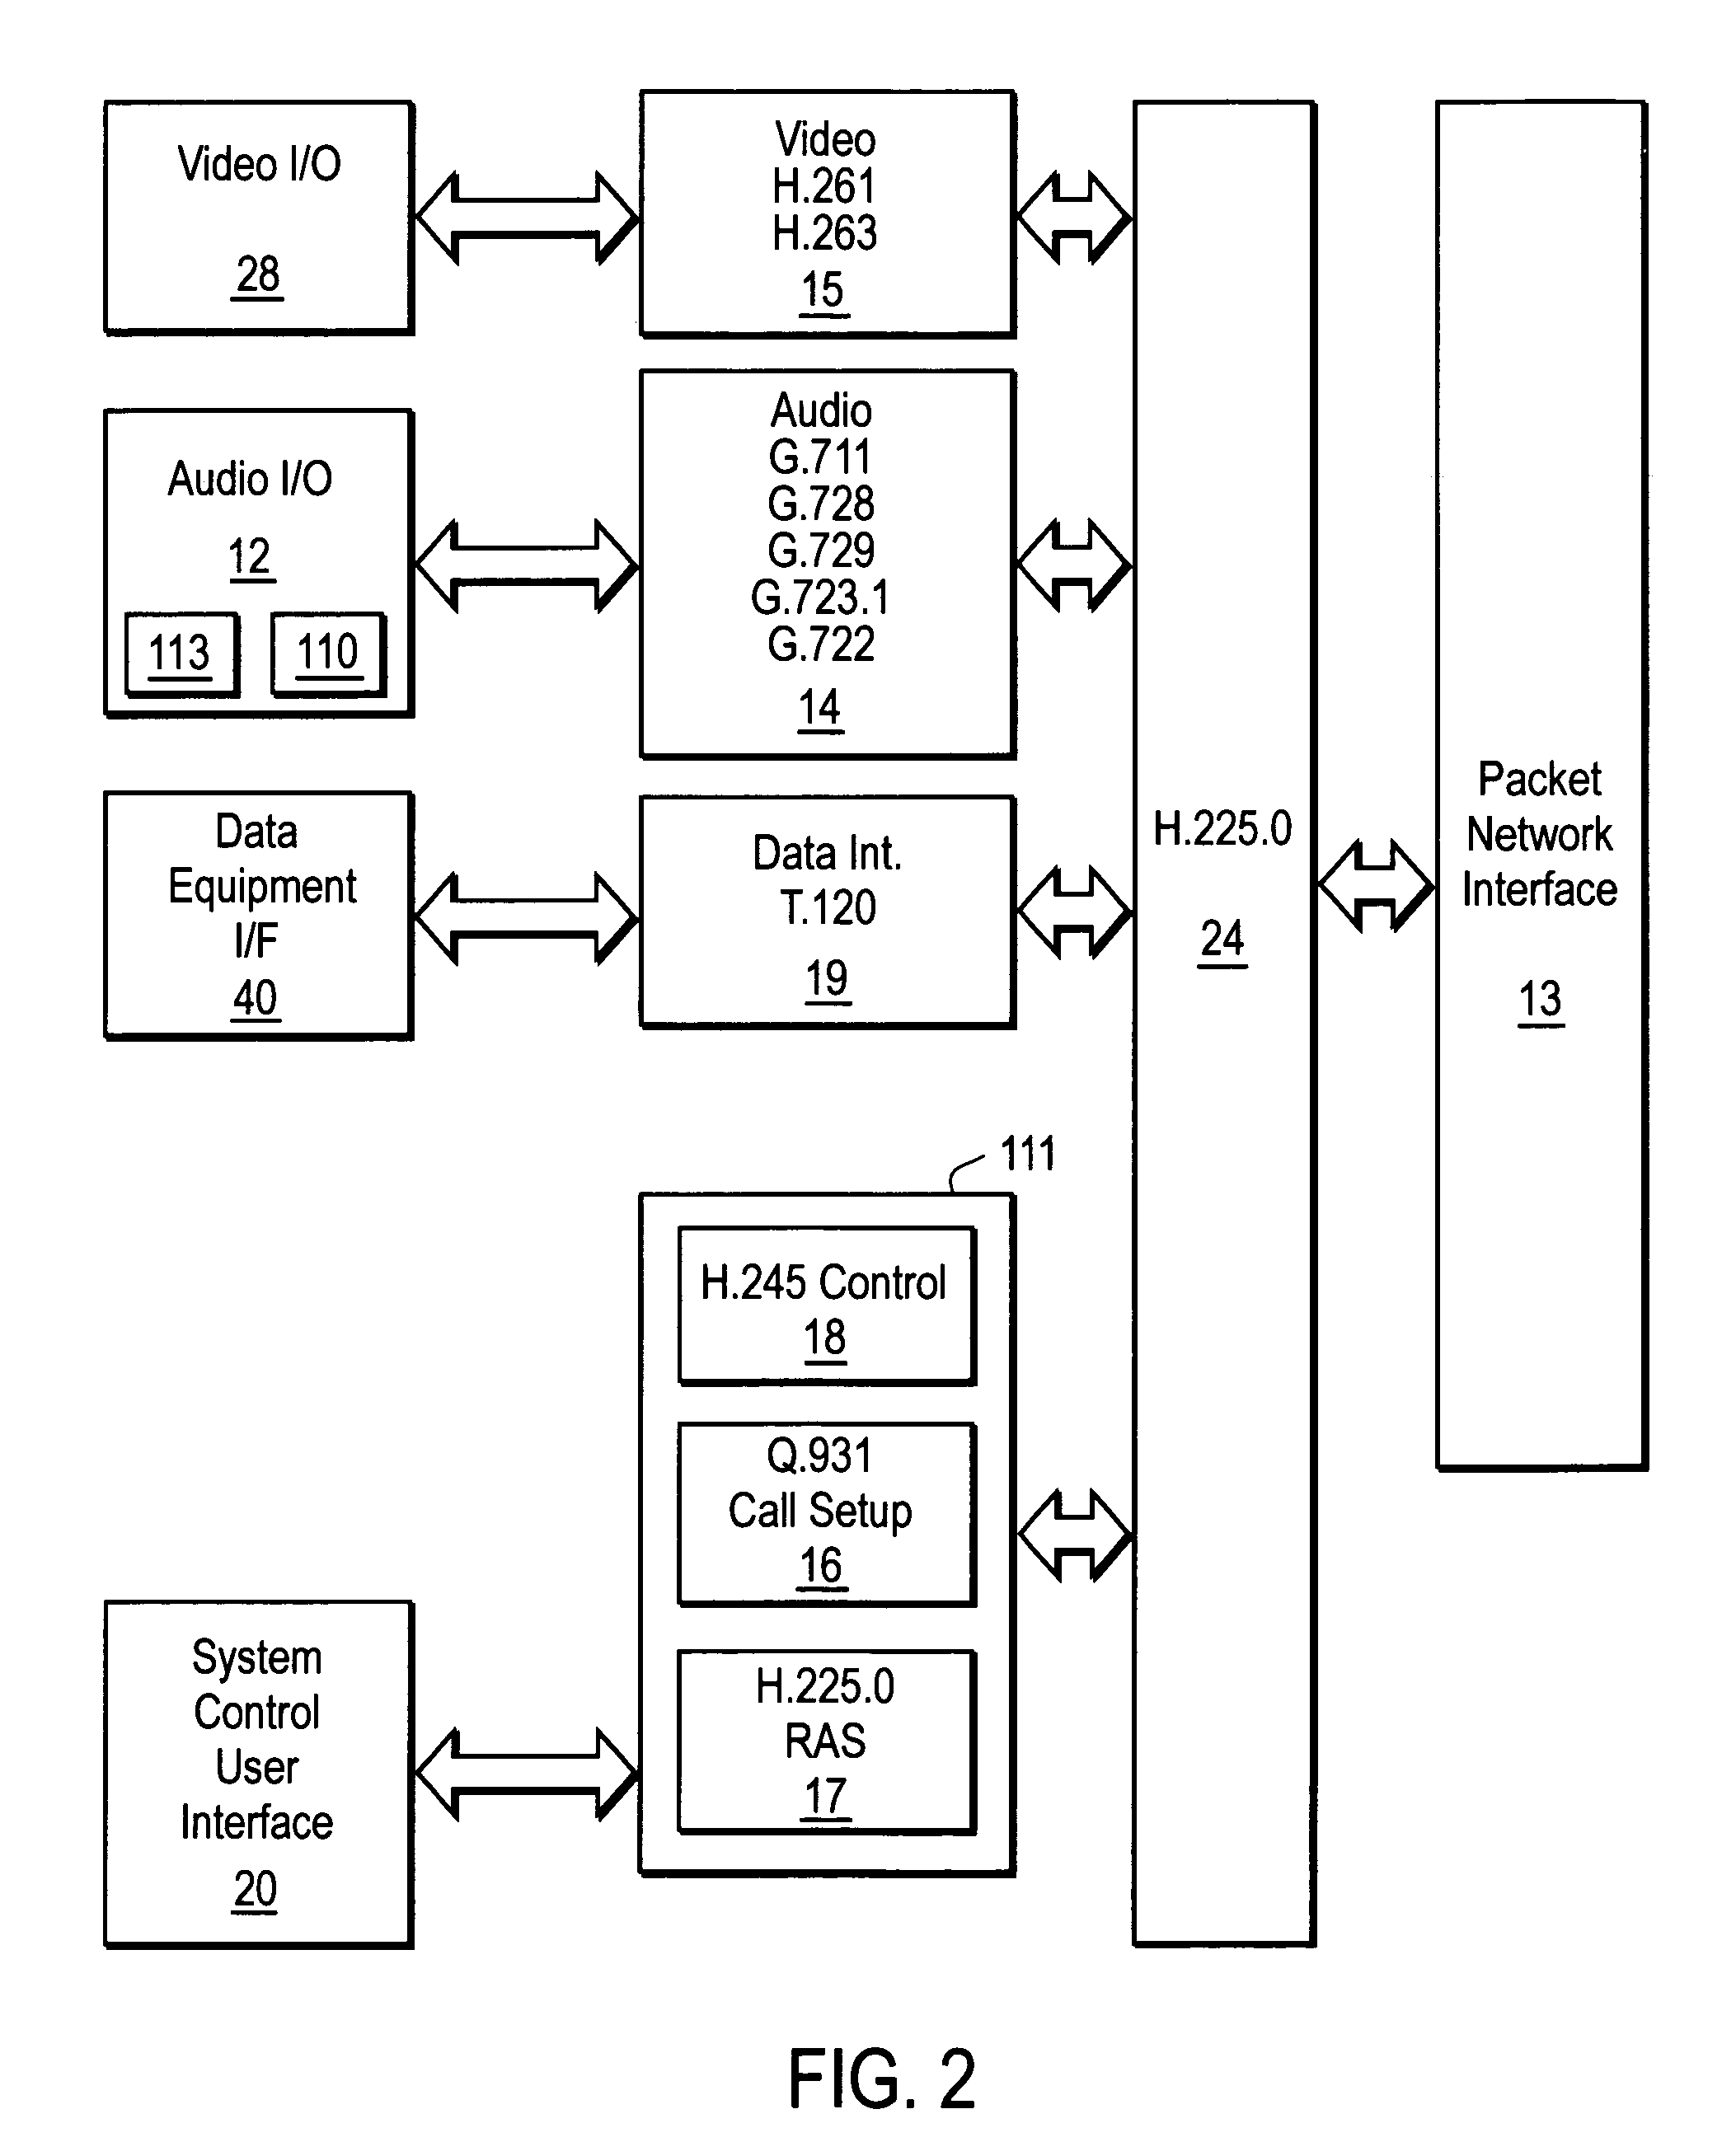 Apparatus and method for optimizing packet length in ToL networks